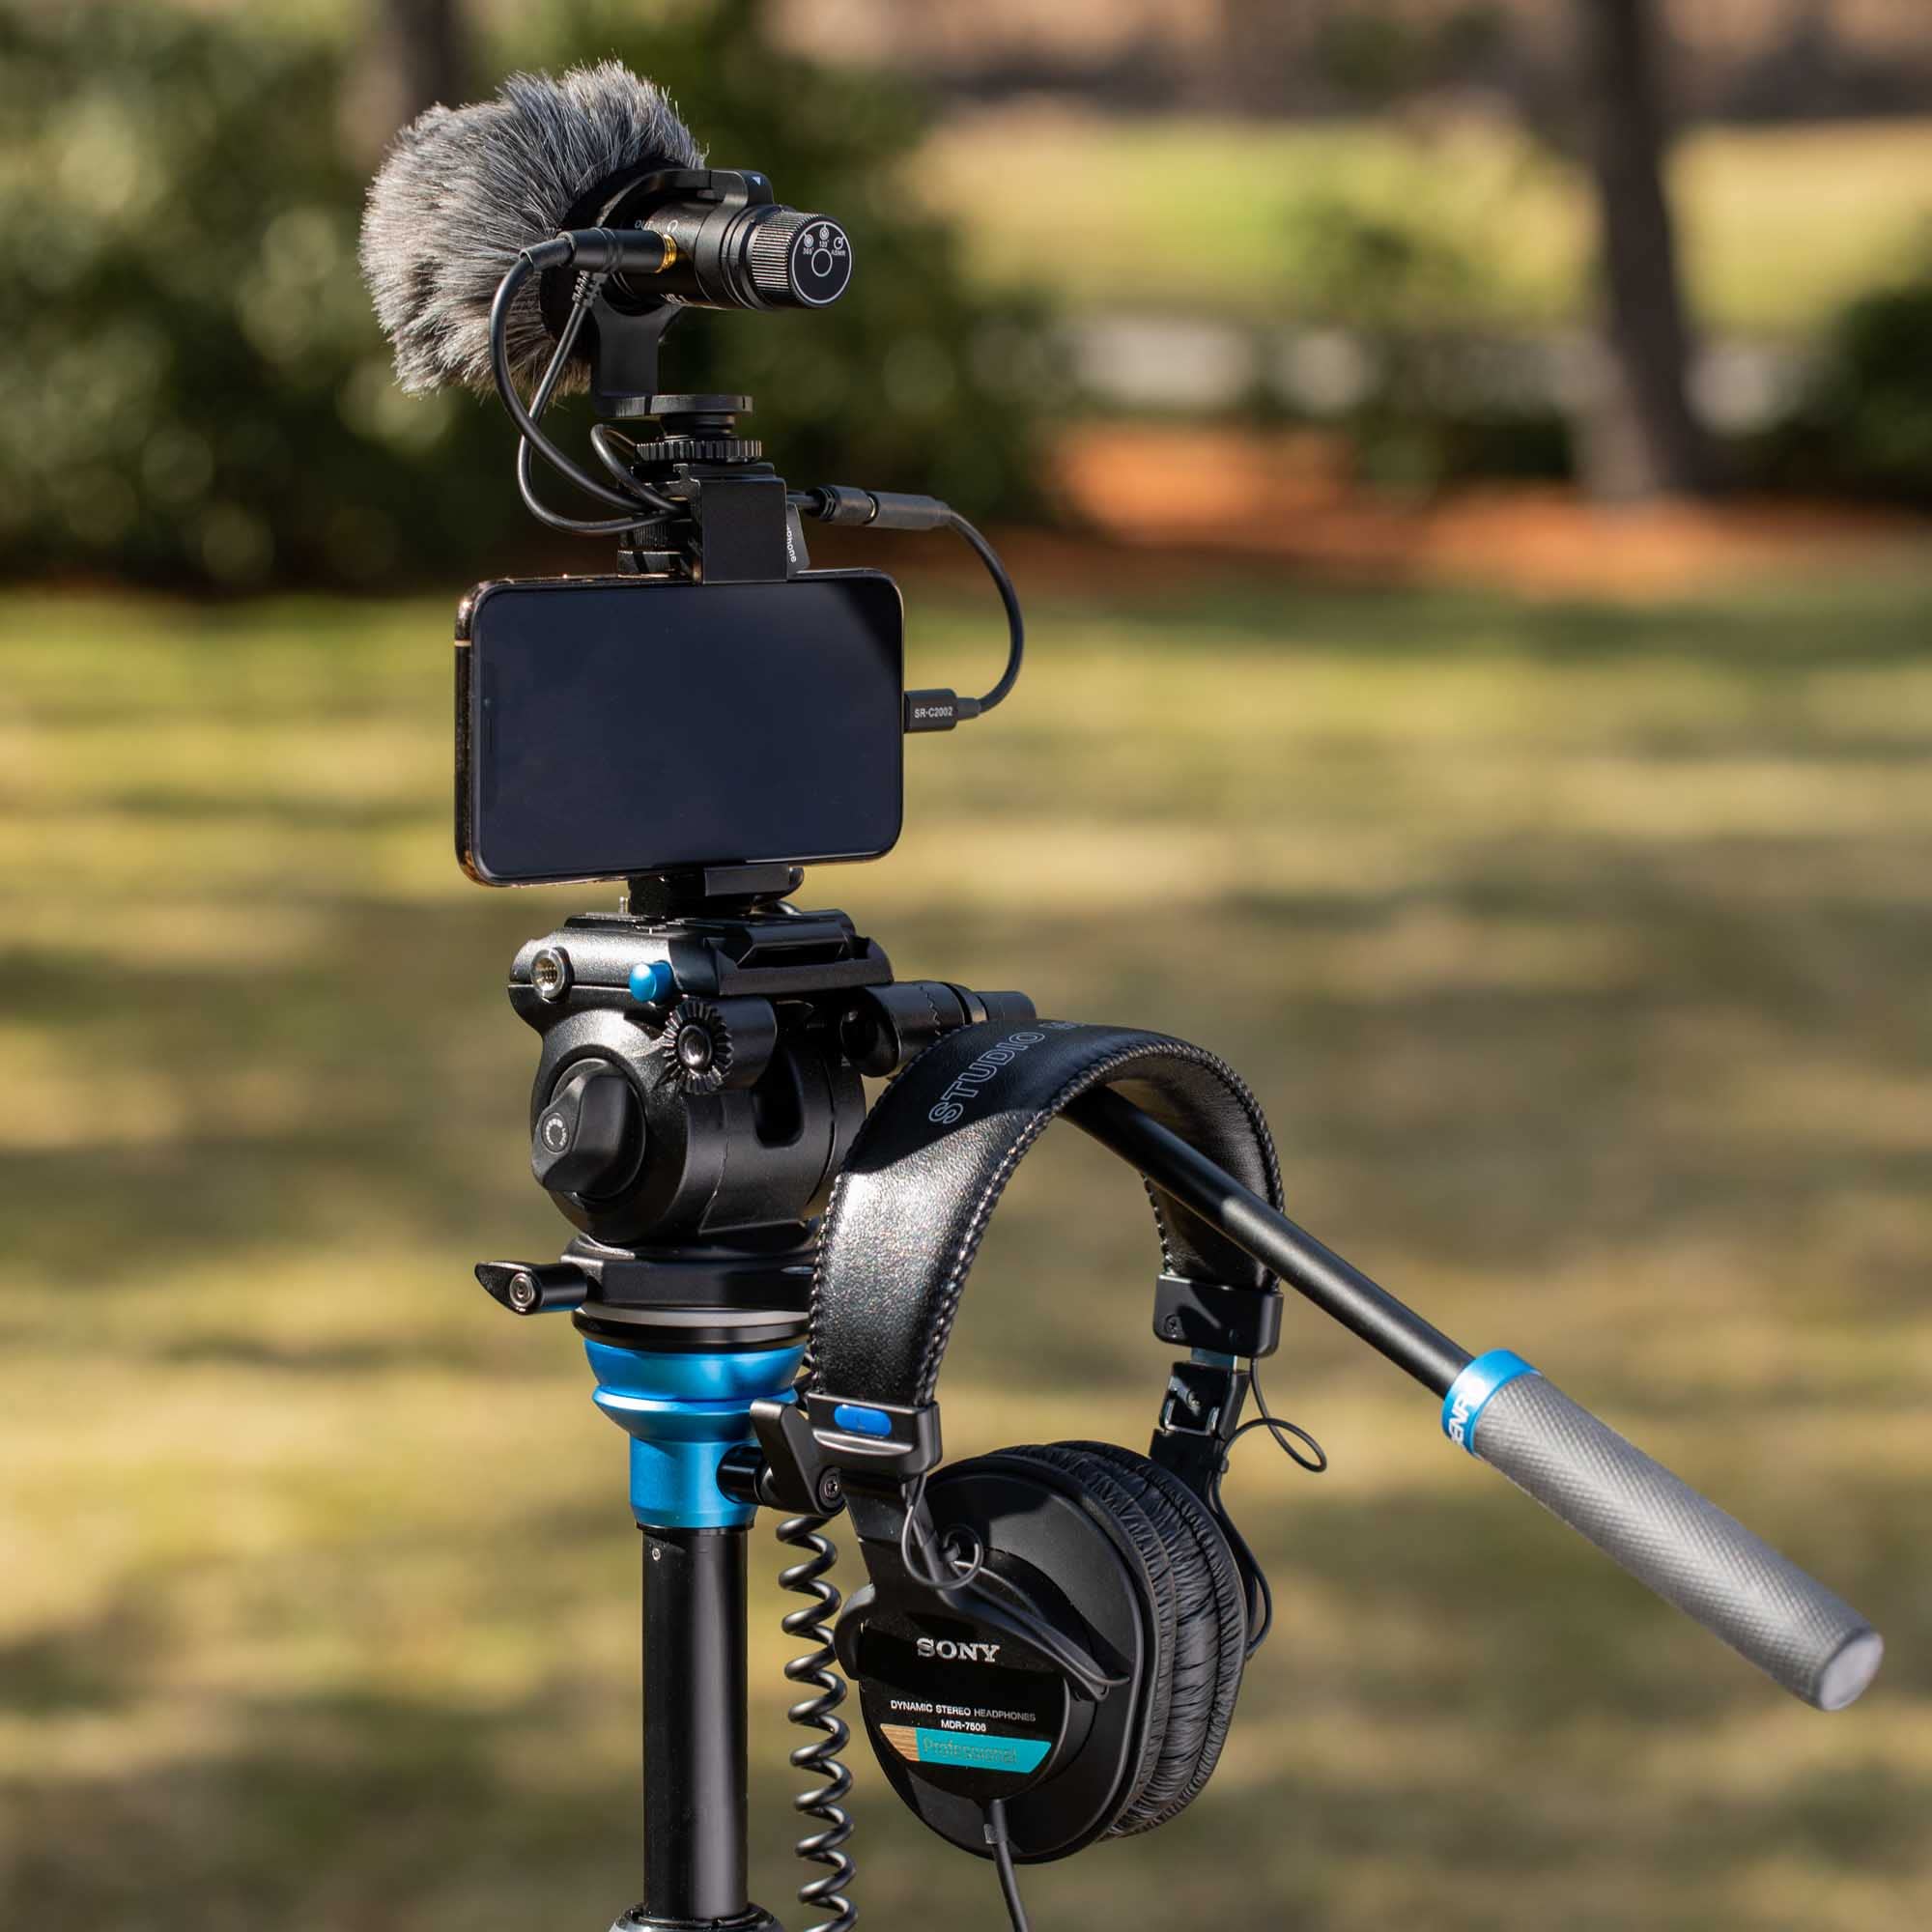 Saramonic Multi-Pattern Camera-Mountable Shotgun Microphone for Cameras and Mobile with Headphone Out, 360˚ Rotatable Shock Mount & More (Vmic Mini S)